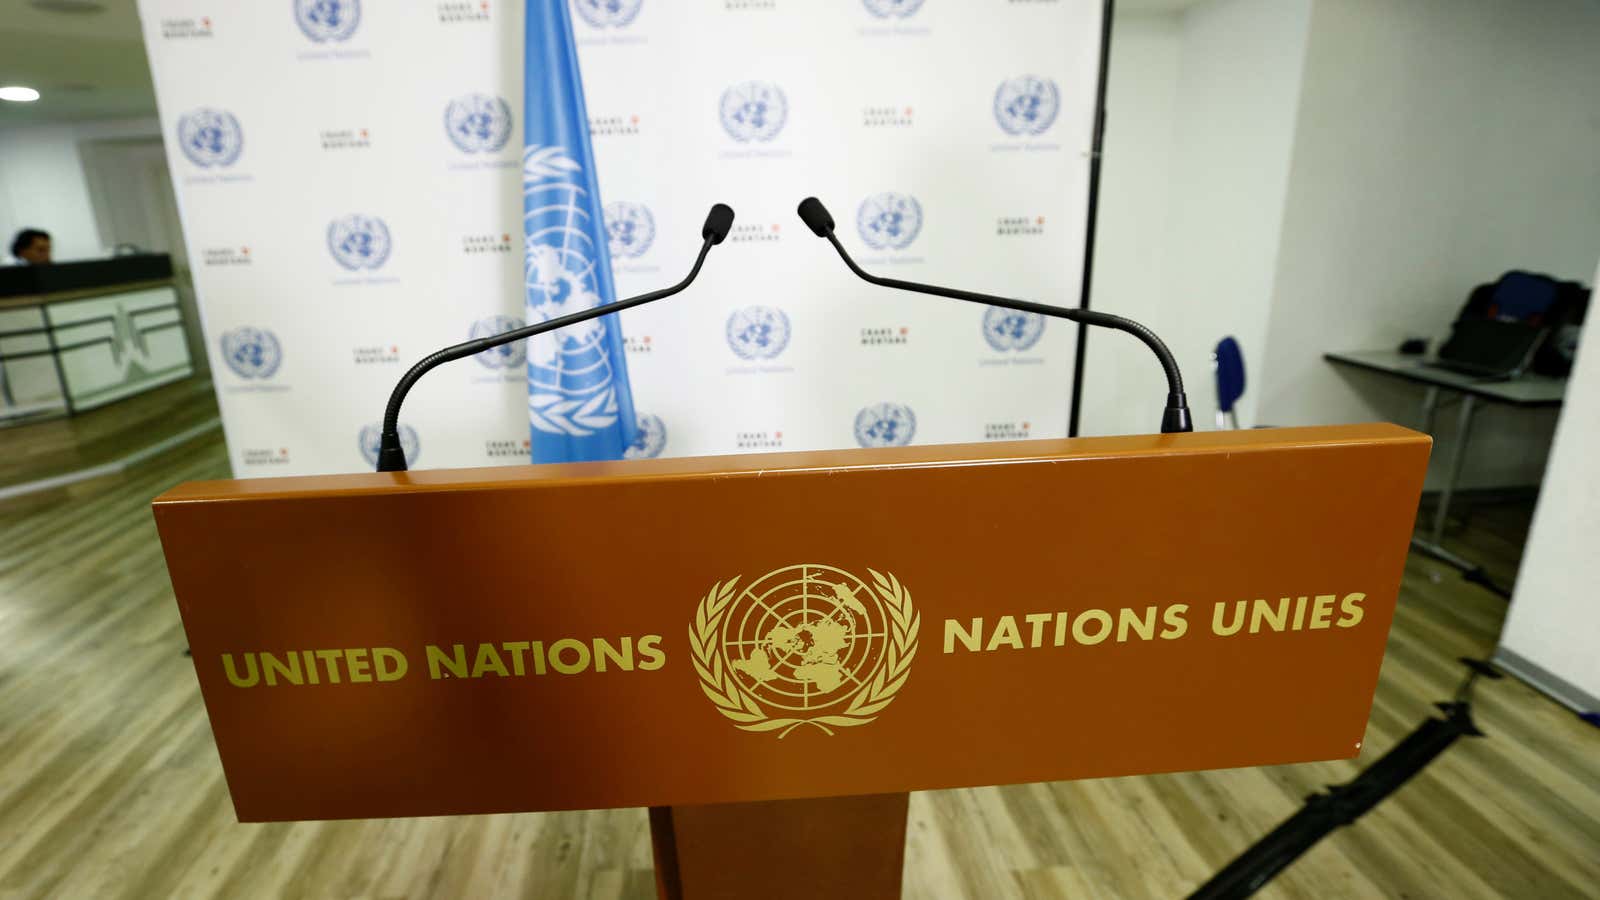 The United Nations logo is pictured on a podium before a news conference in the Alpine resort of Crans-Montana, Switzerland, June 28, 2017. REUTERS/Denis Balibouse